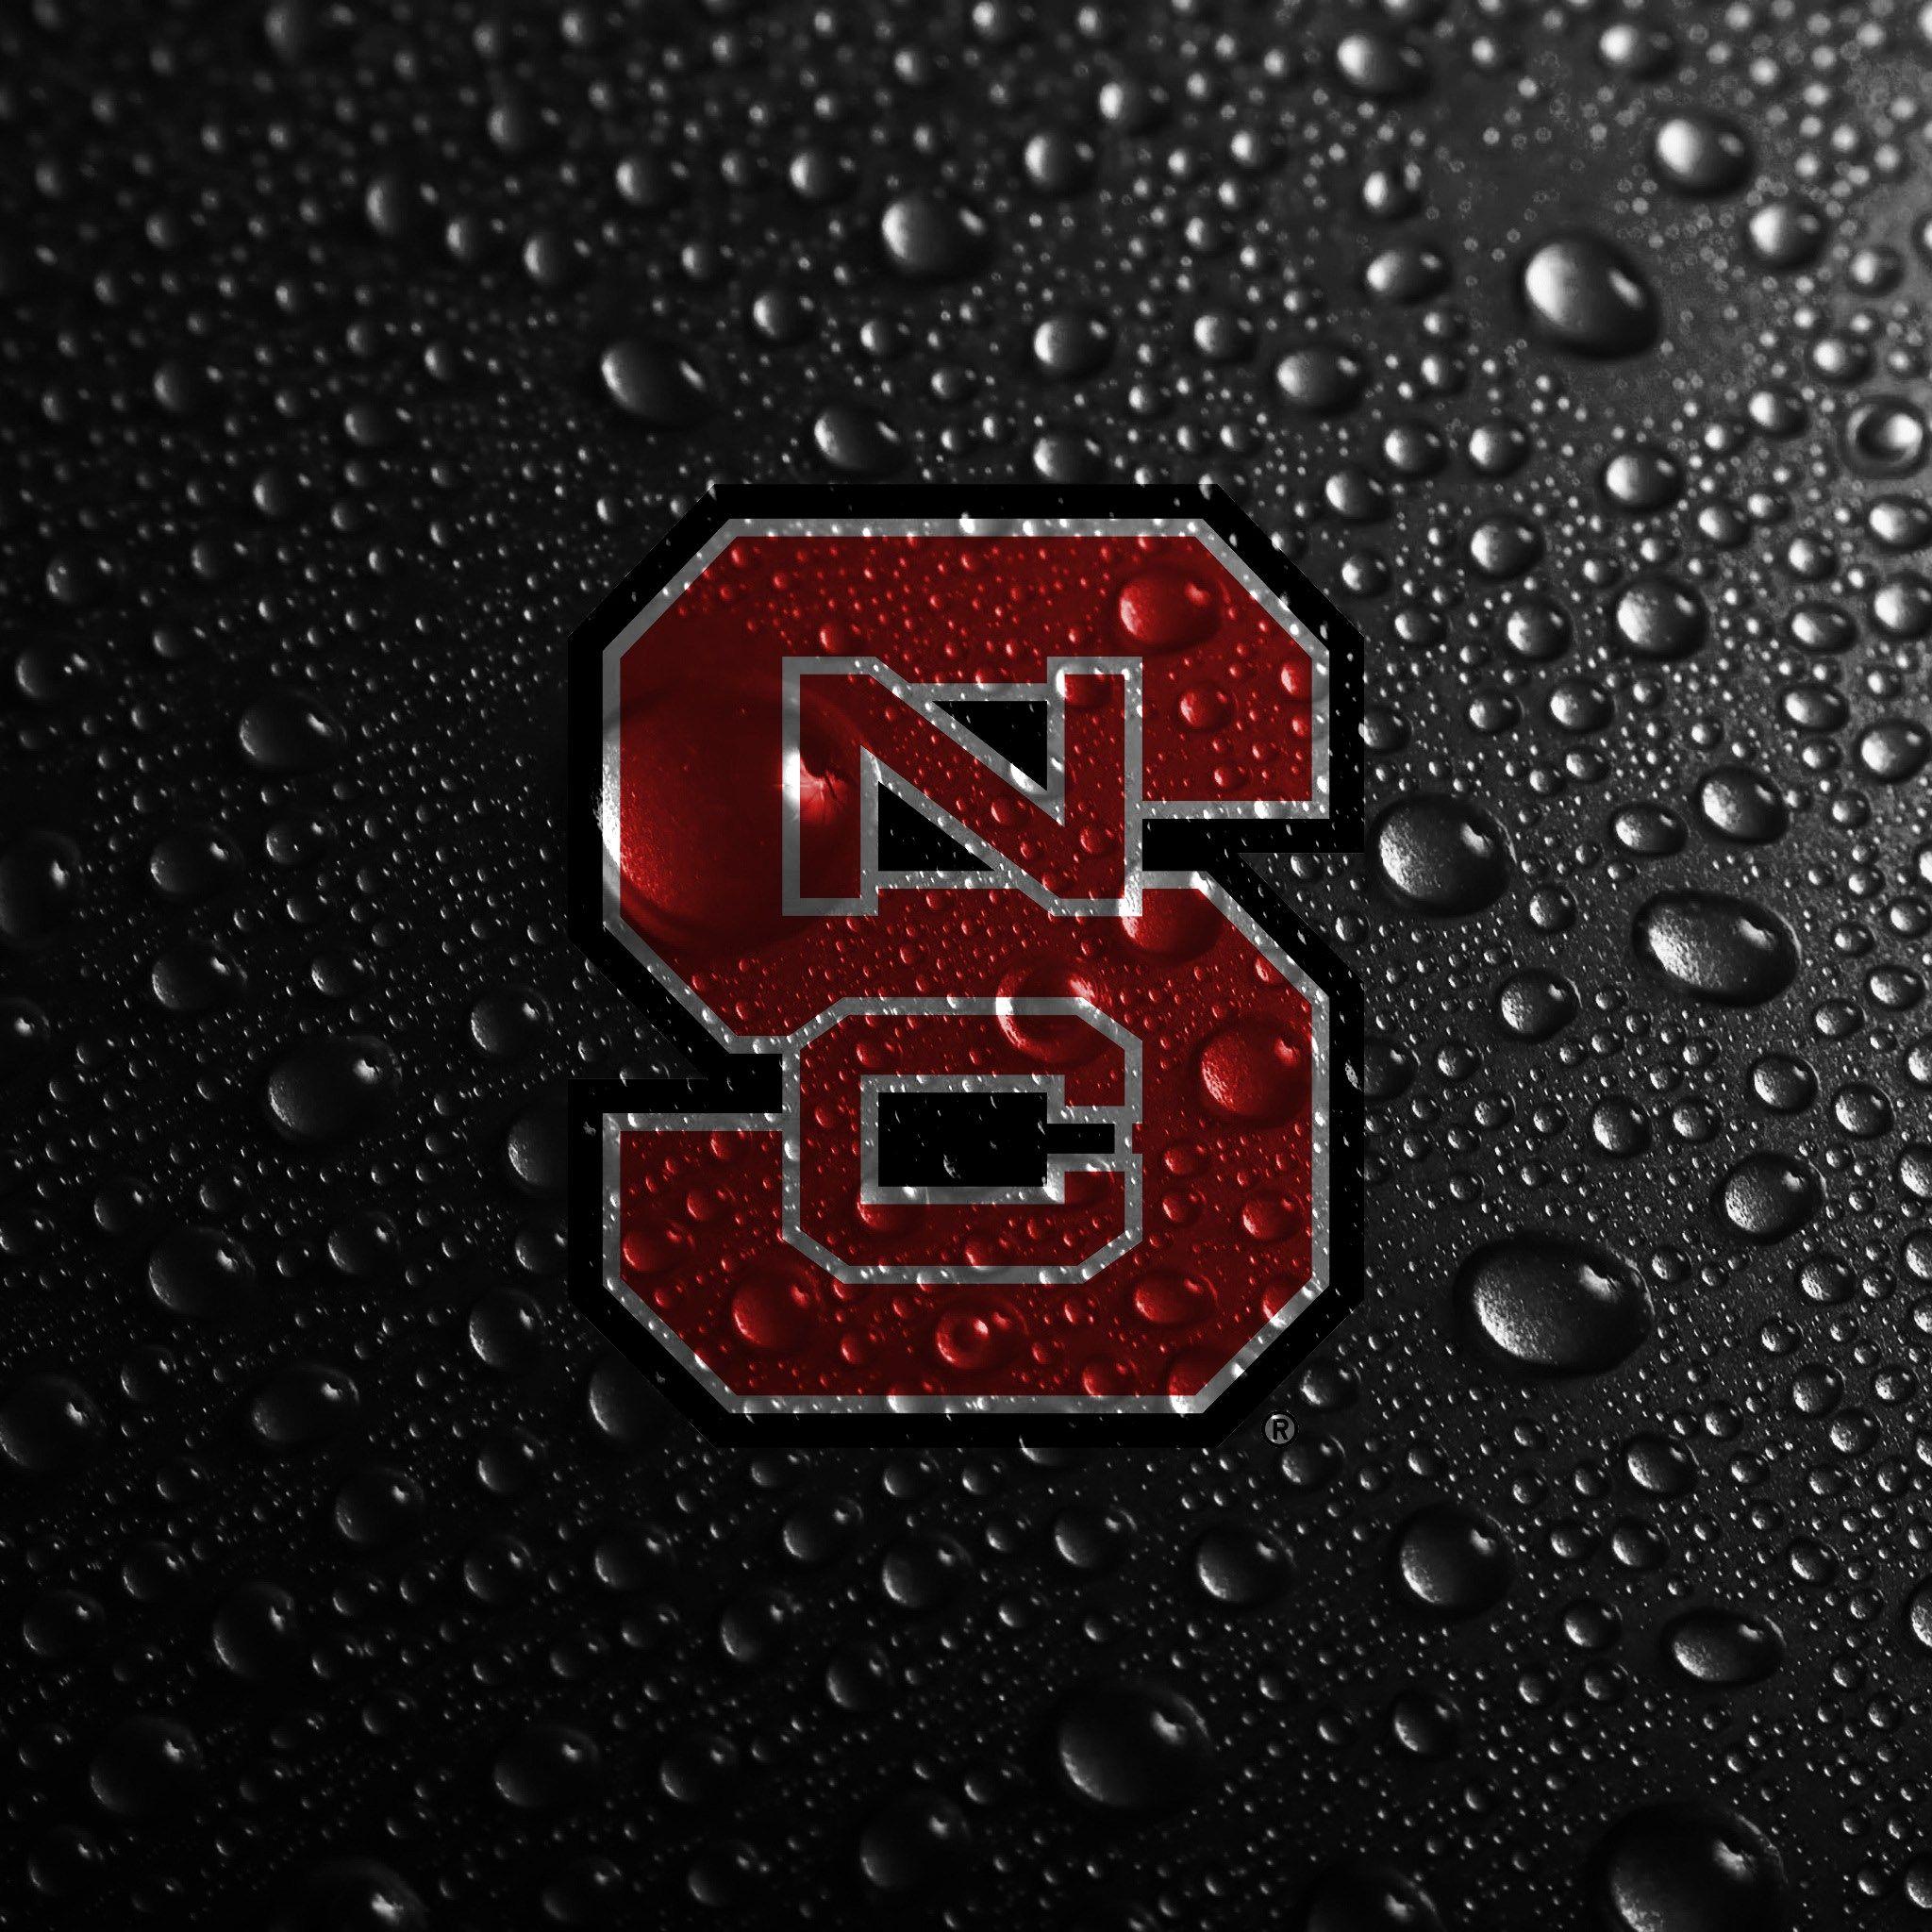 NC State Wallpaper From Carter Finley